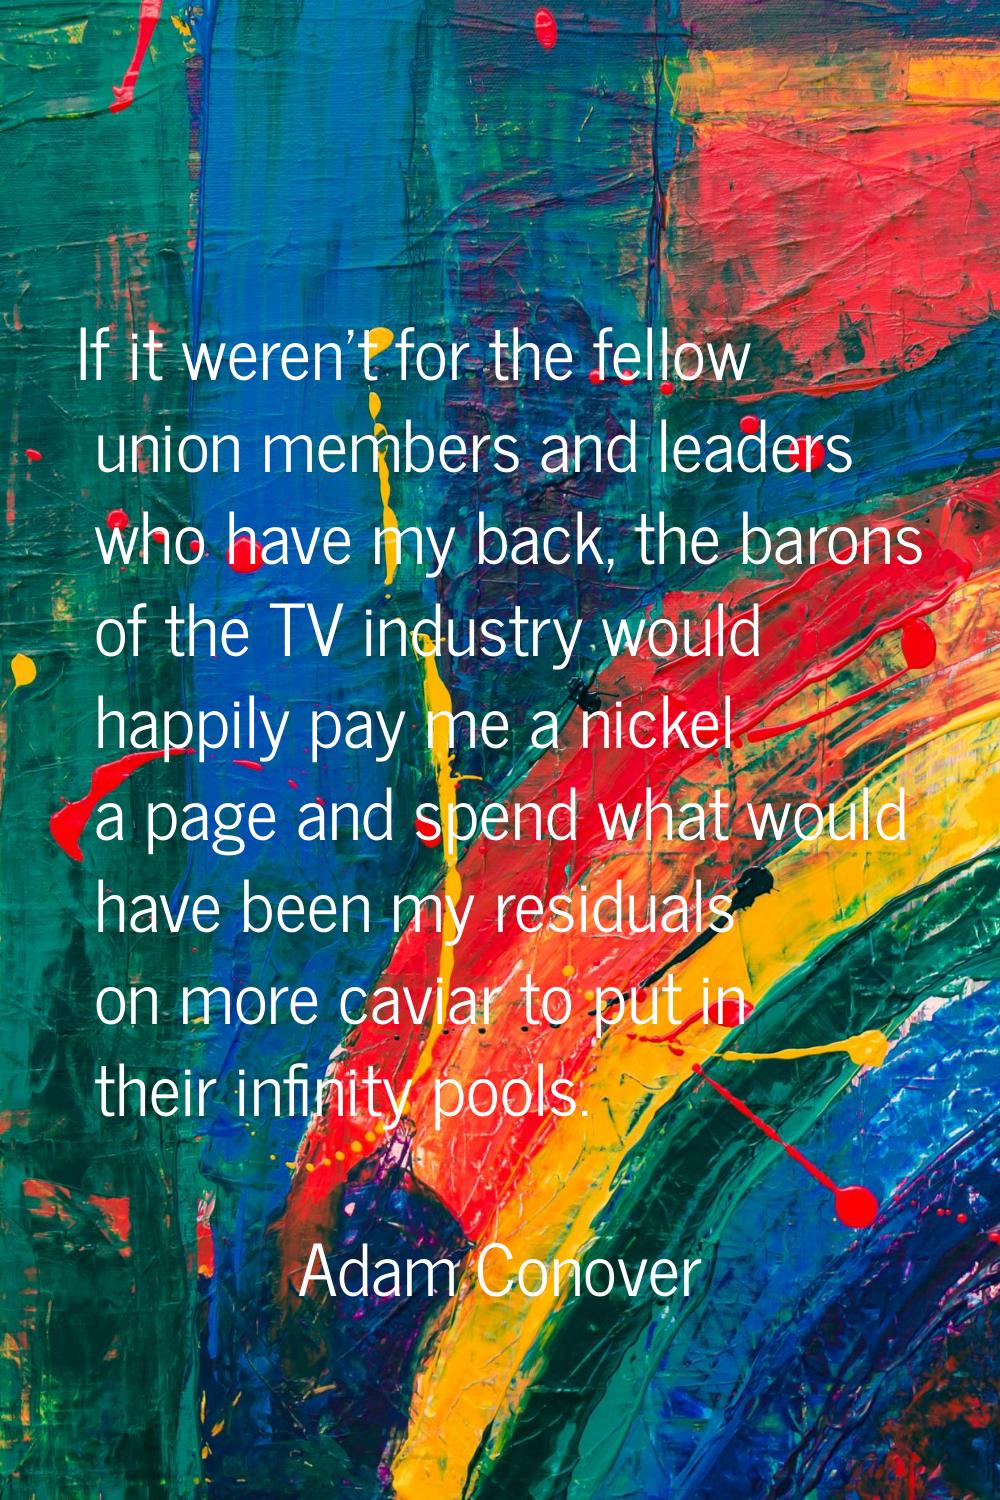 If it weren't for the fellow union members and leaders who have my back, the barons of the TV indus